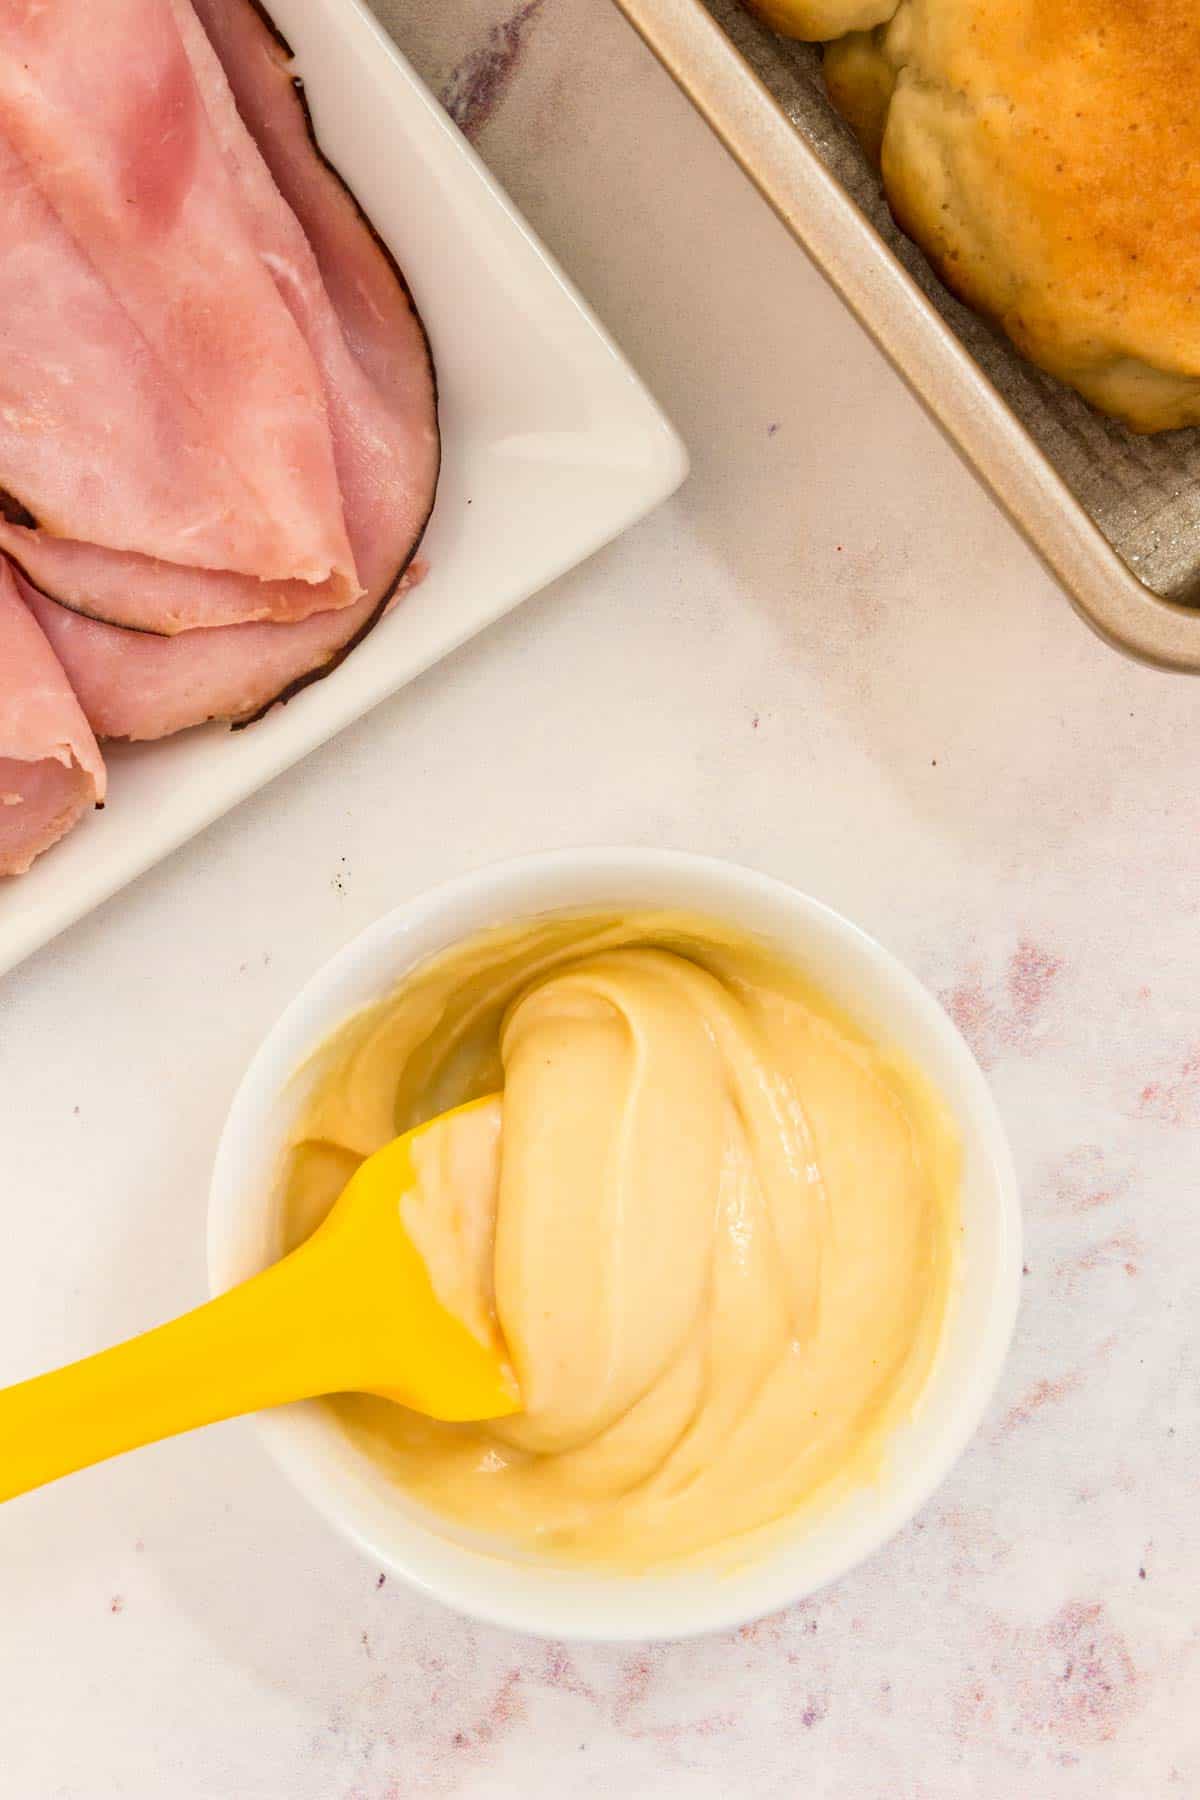 Mustard and mayonnaise mixed together in a small dish.